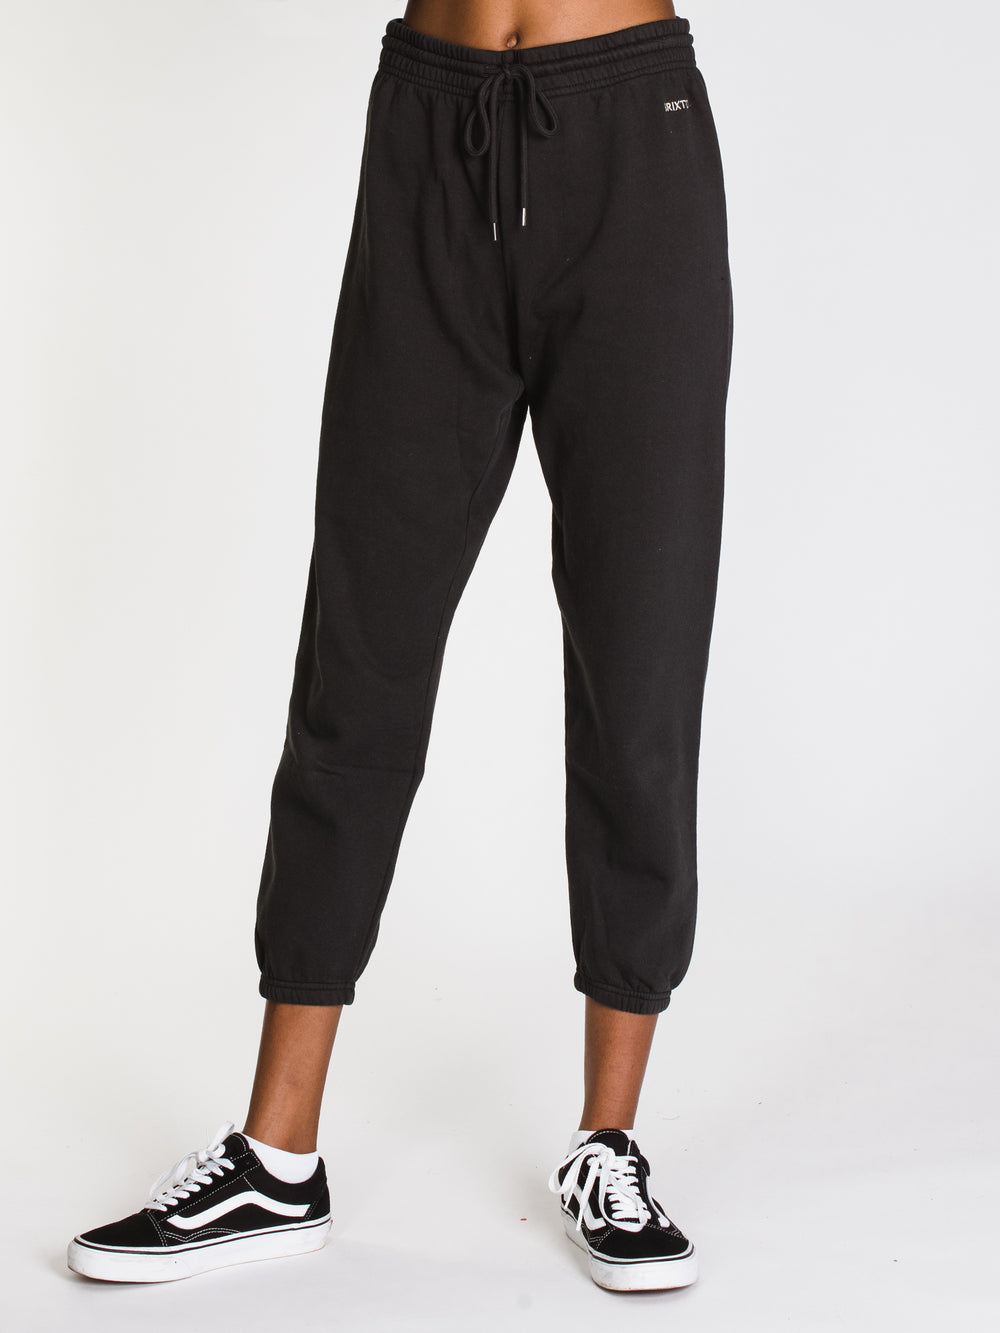 WOMENS VNTG SWTPNT - WASHED BLACK - CLEARANCE